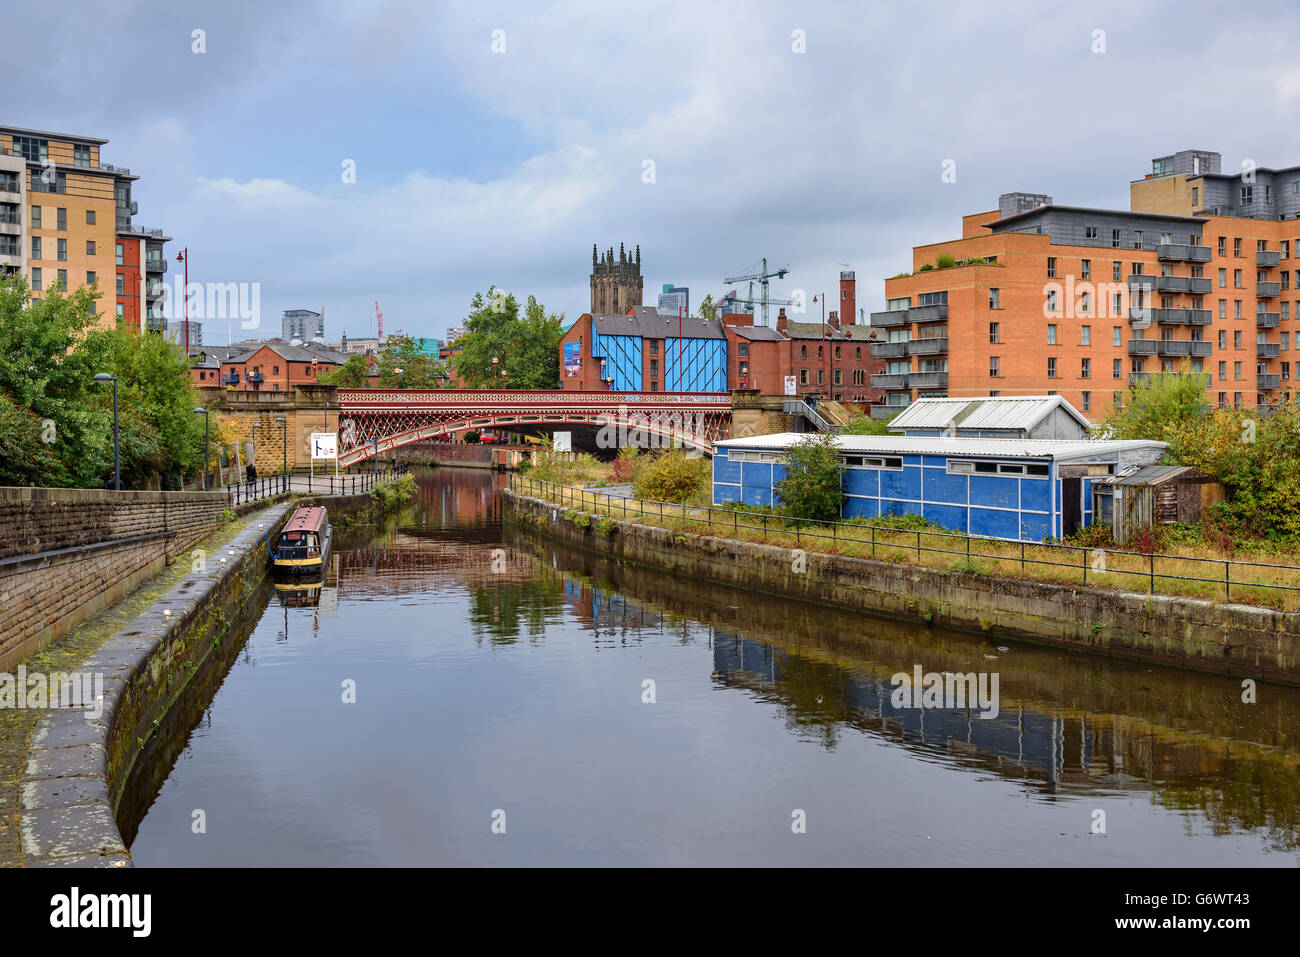 Leeds Dock is a mixed development with retail, office and leisure presence by the River Aire in Leeds, West Yorkshire, England Stock Photo